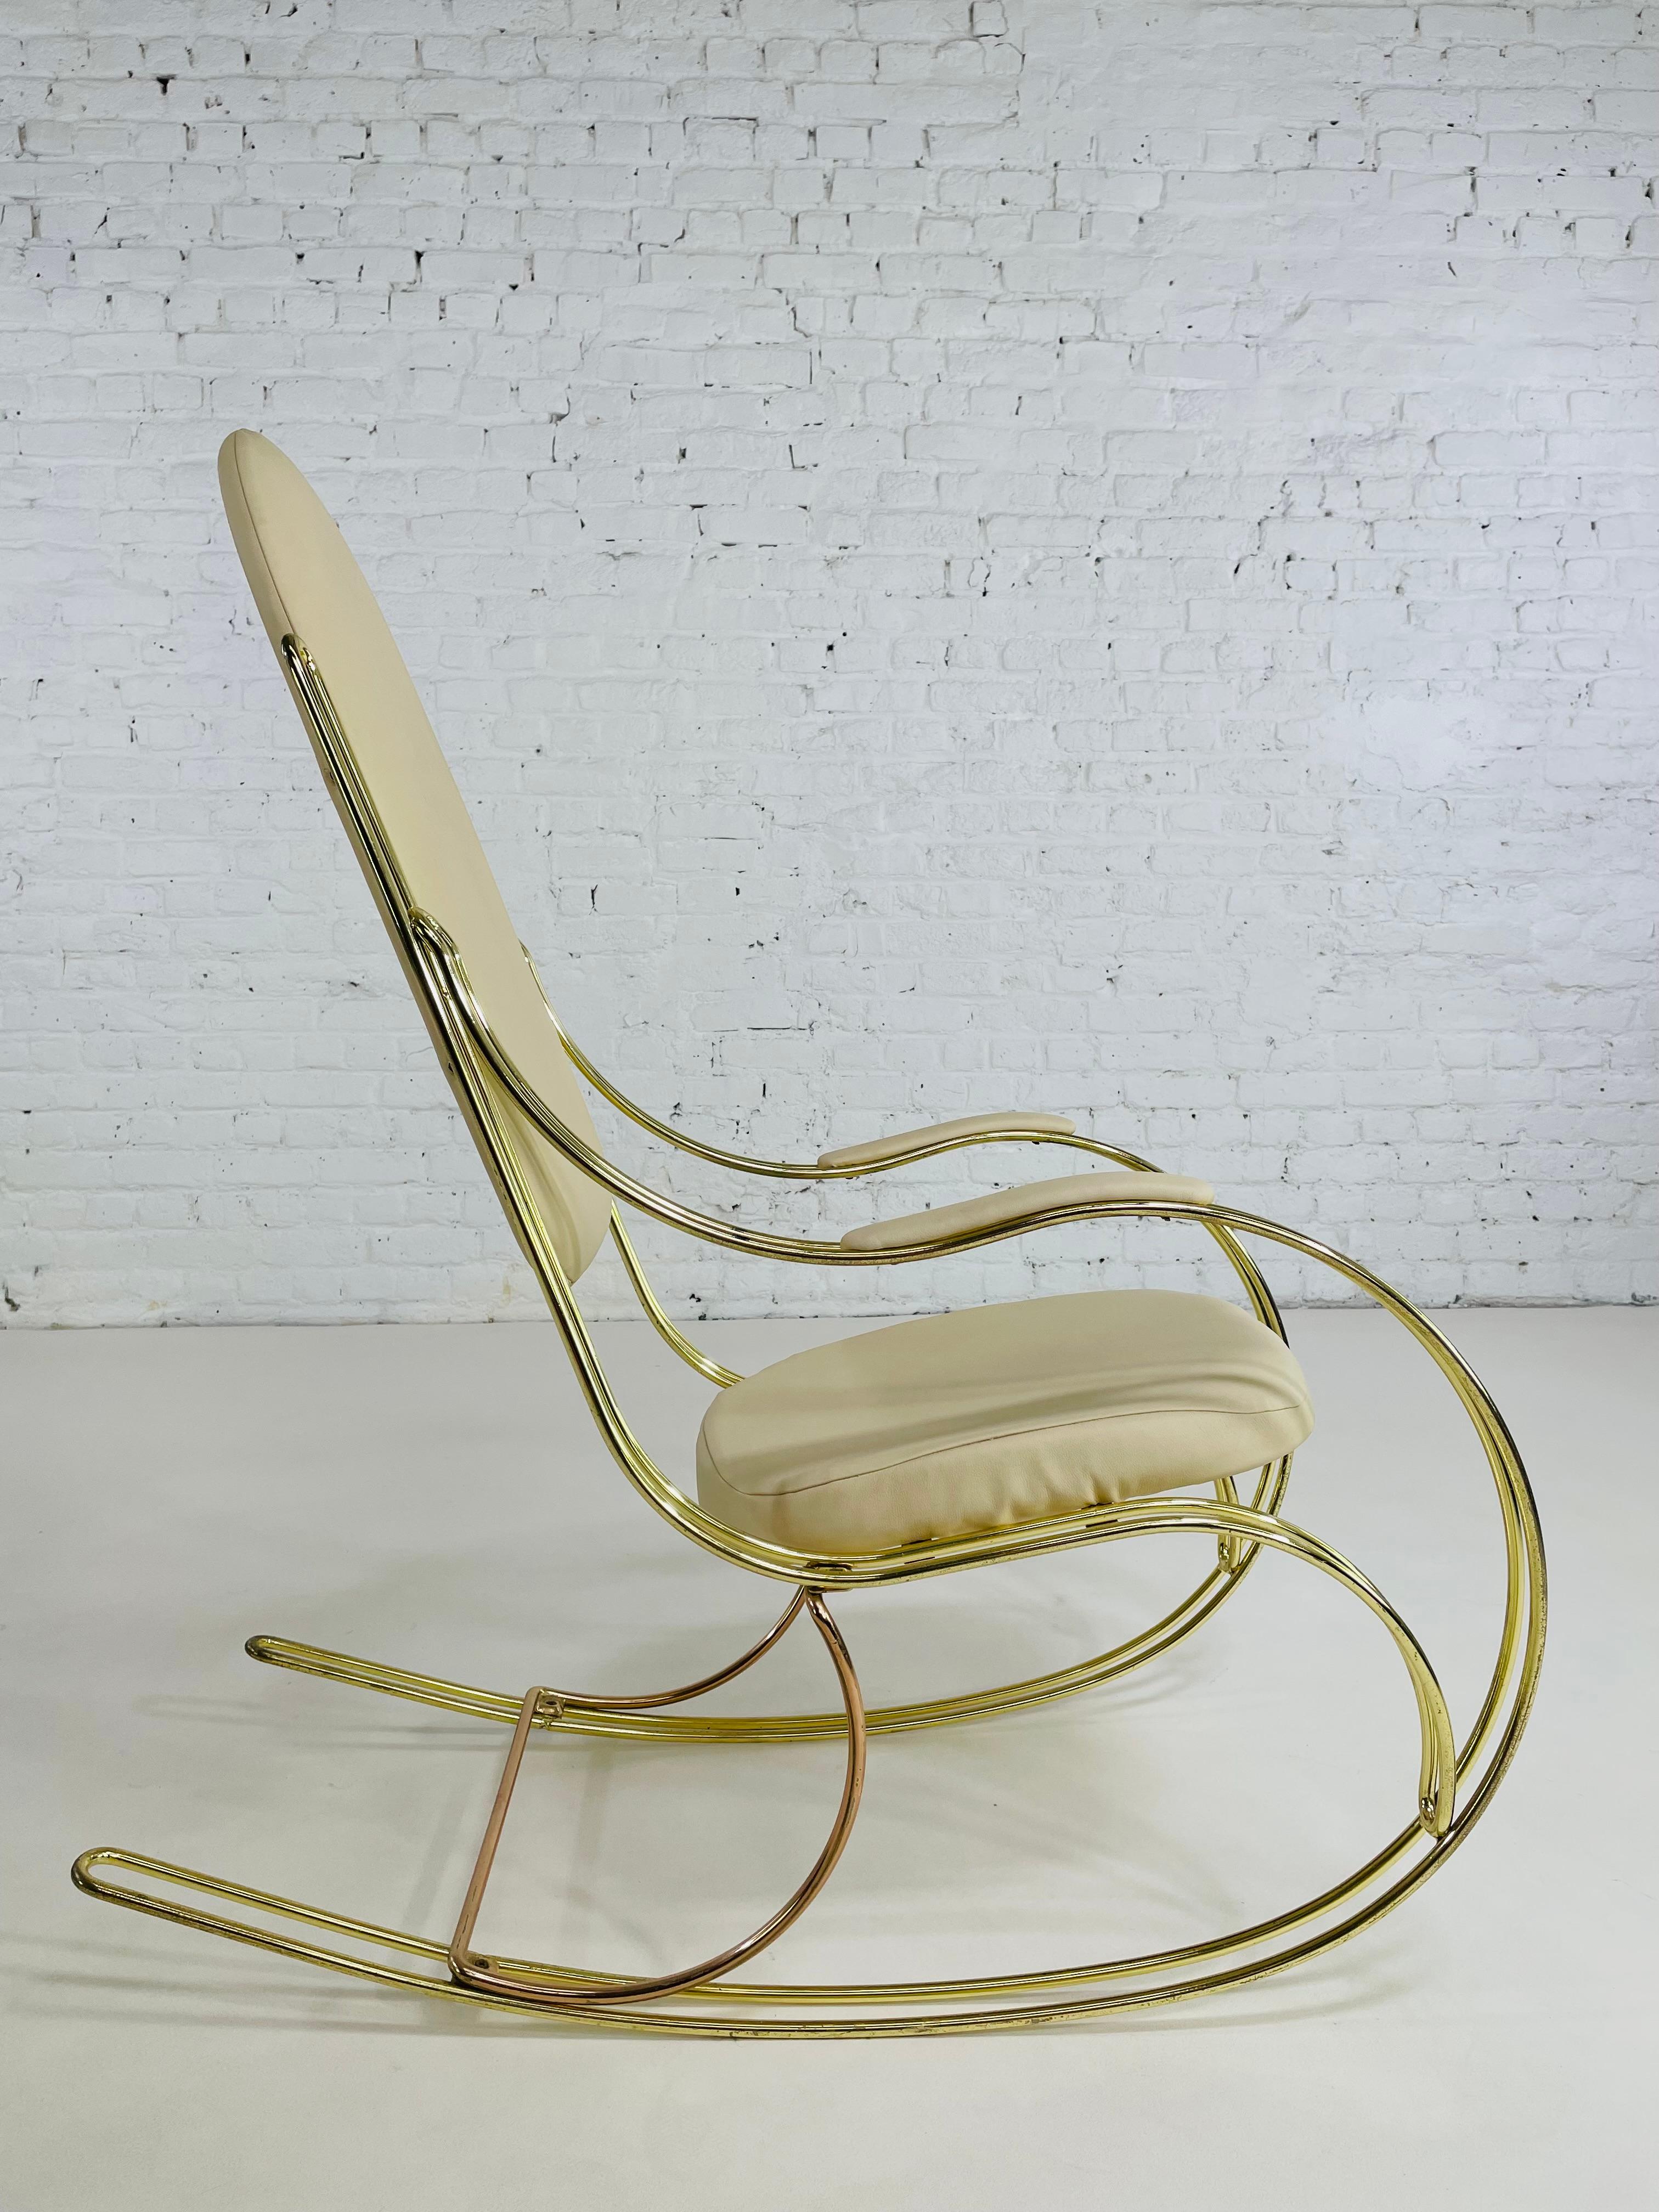 1960s-1970s Brass And Beige Faux Leather Rocking Chair For Sale 1